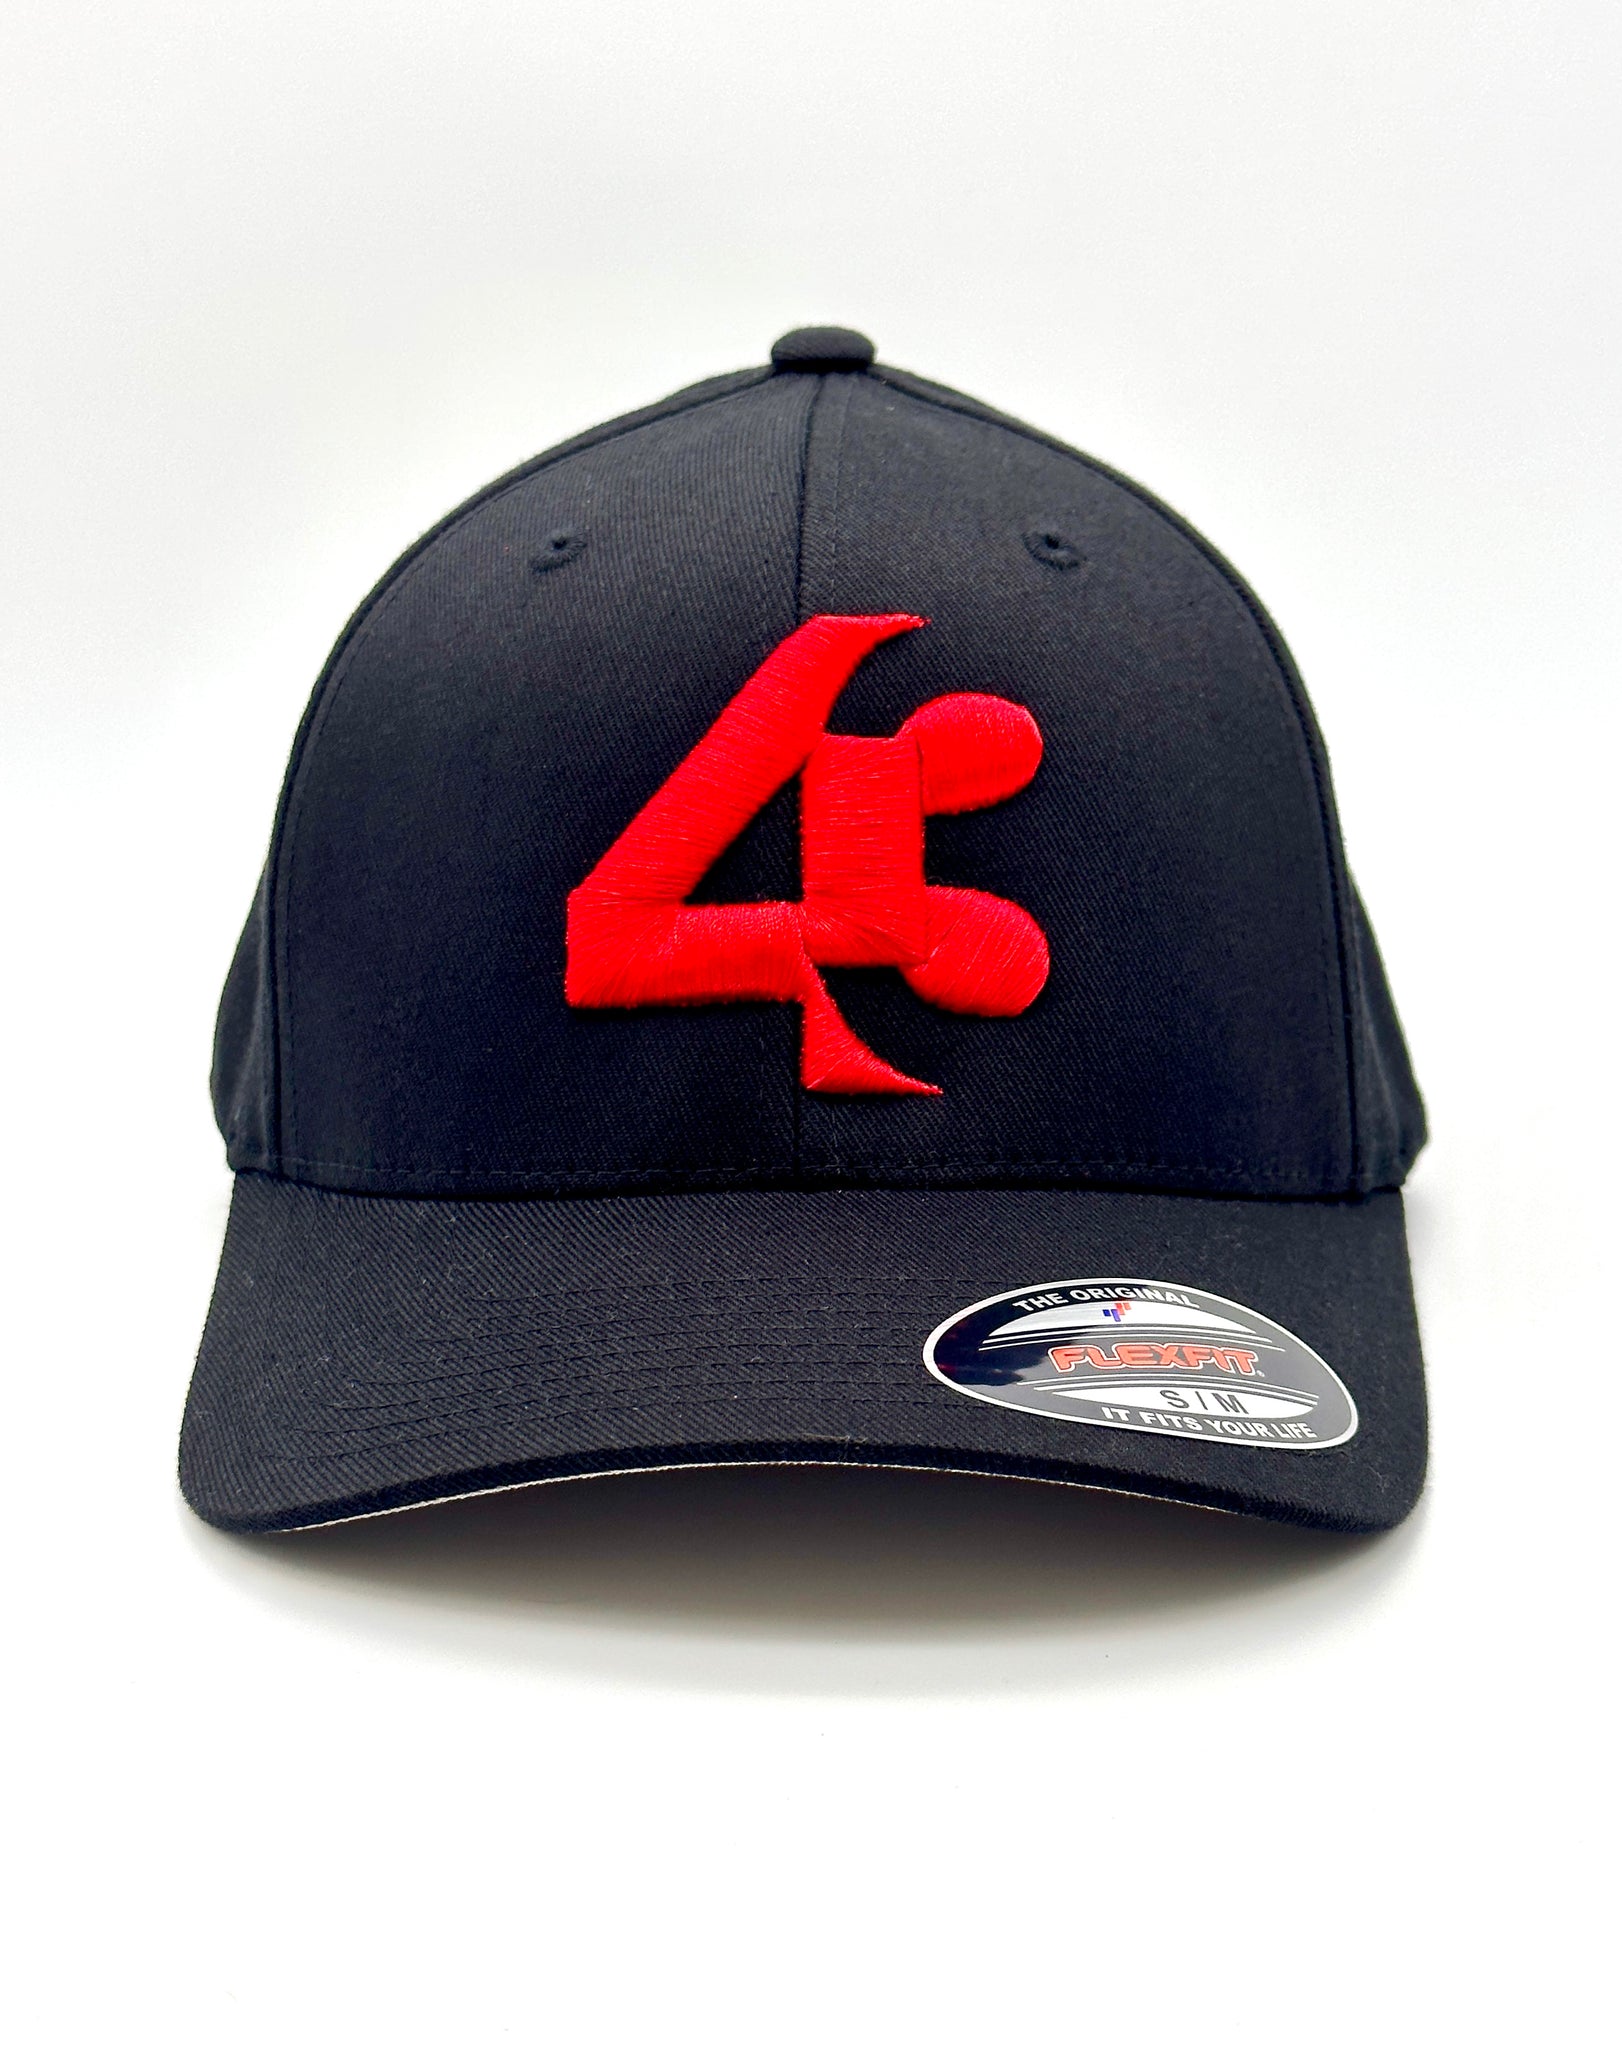 43 Black with red emblem Fitted FortyThree™ USA – Flexfit®